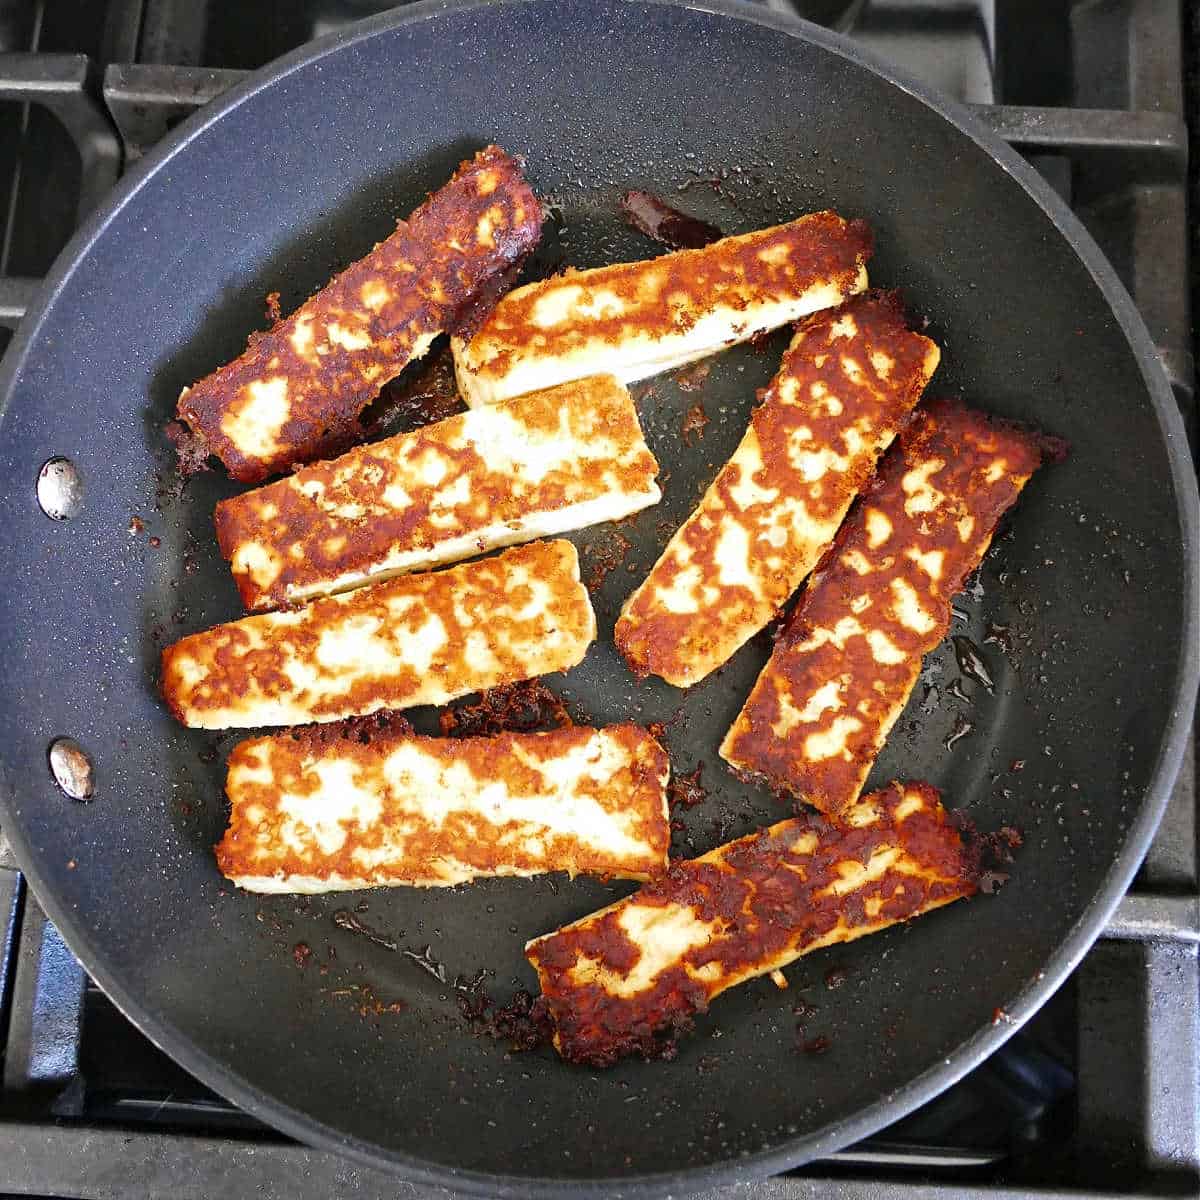 halloumi cheese frying in olive oil and cumin in a skillet on a stove